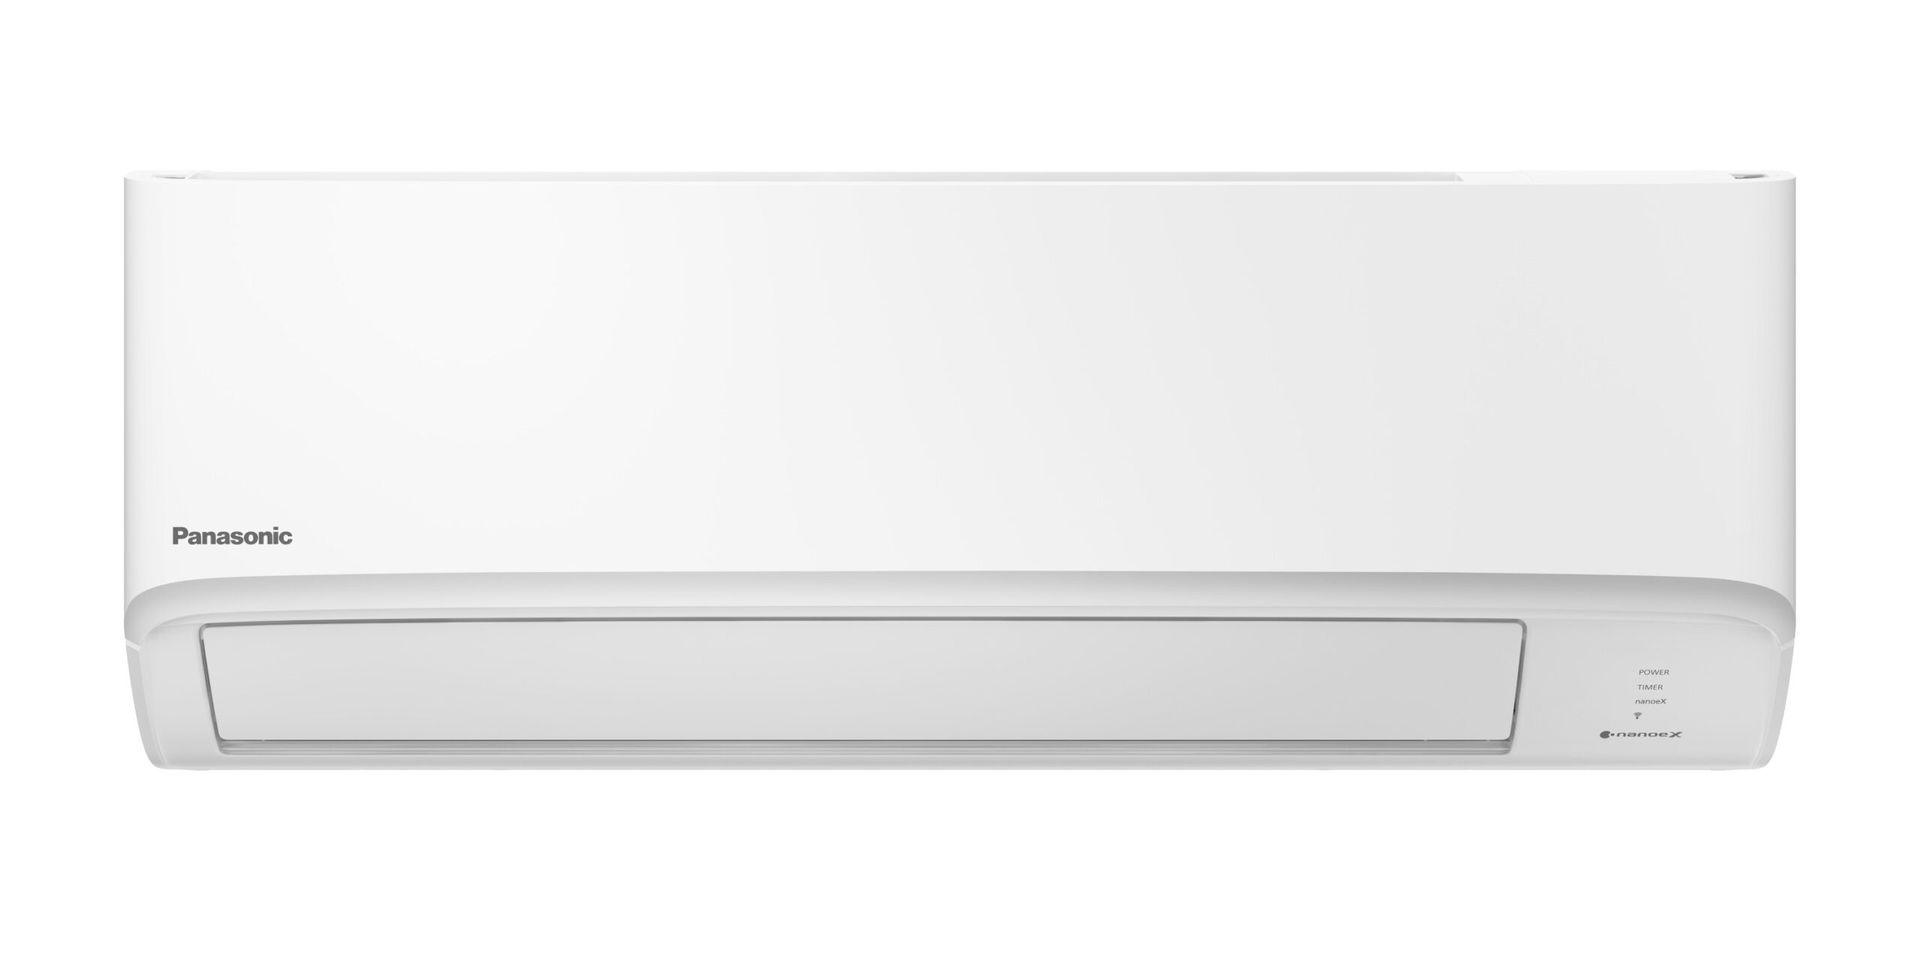 a white wall mounted nanoex panasonic air conditioner on a white background.